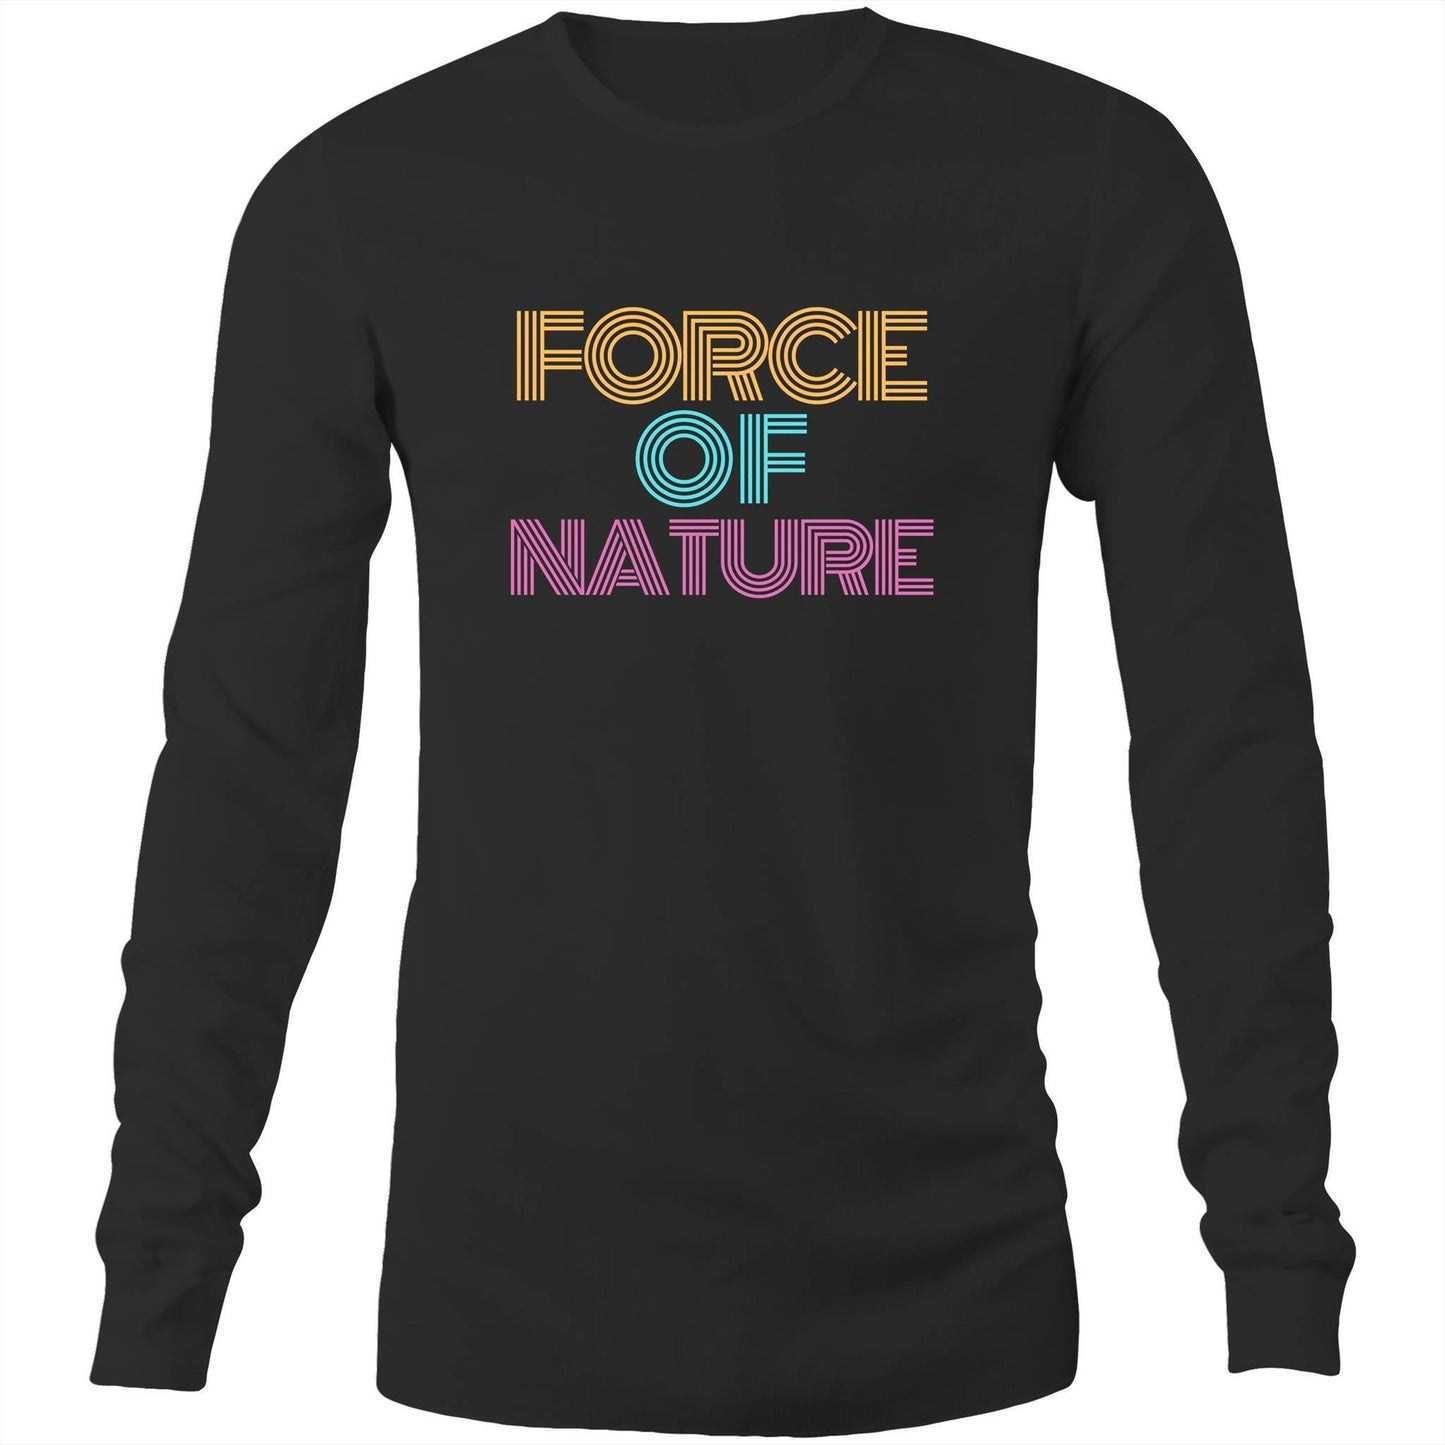 Force Of Nature - Long Sleeve T-Shirt Black Unisex Long Sleeve T-shirt Mens Womens